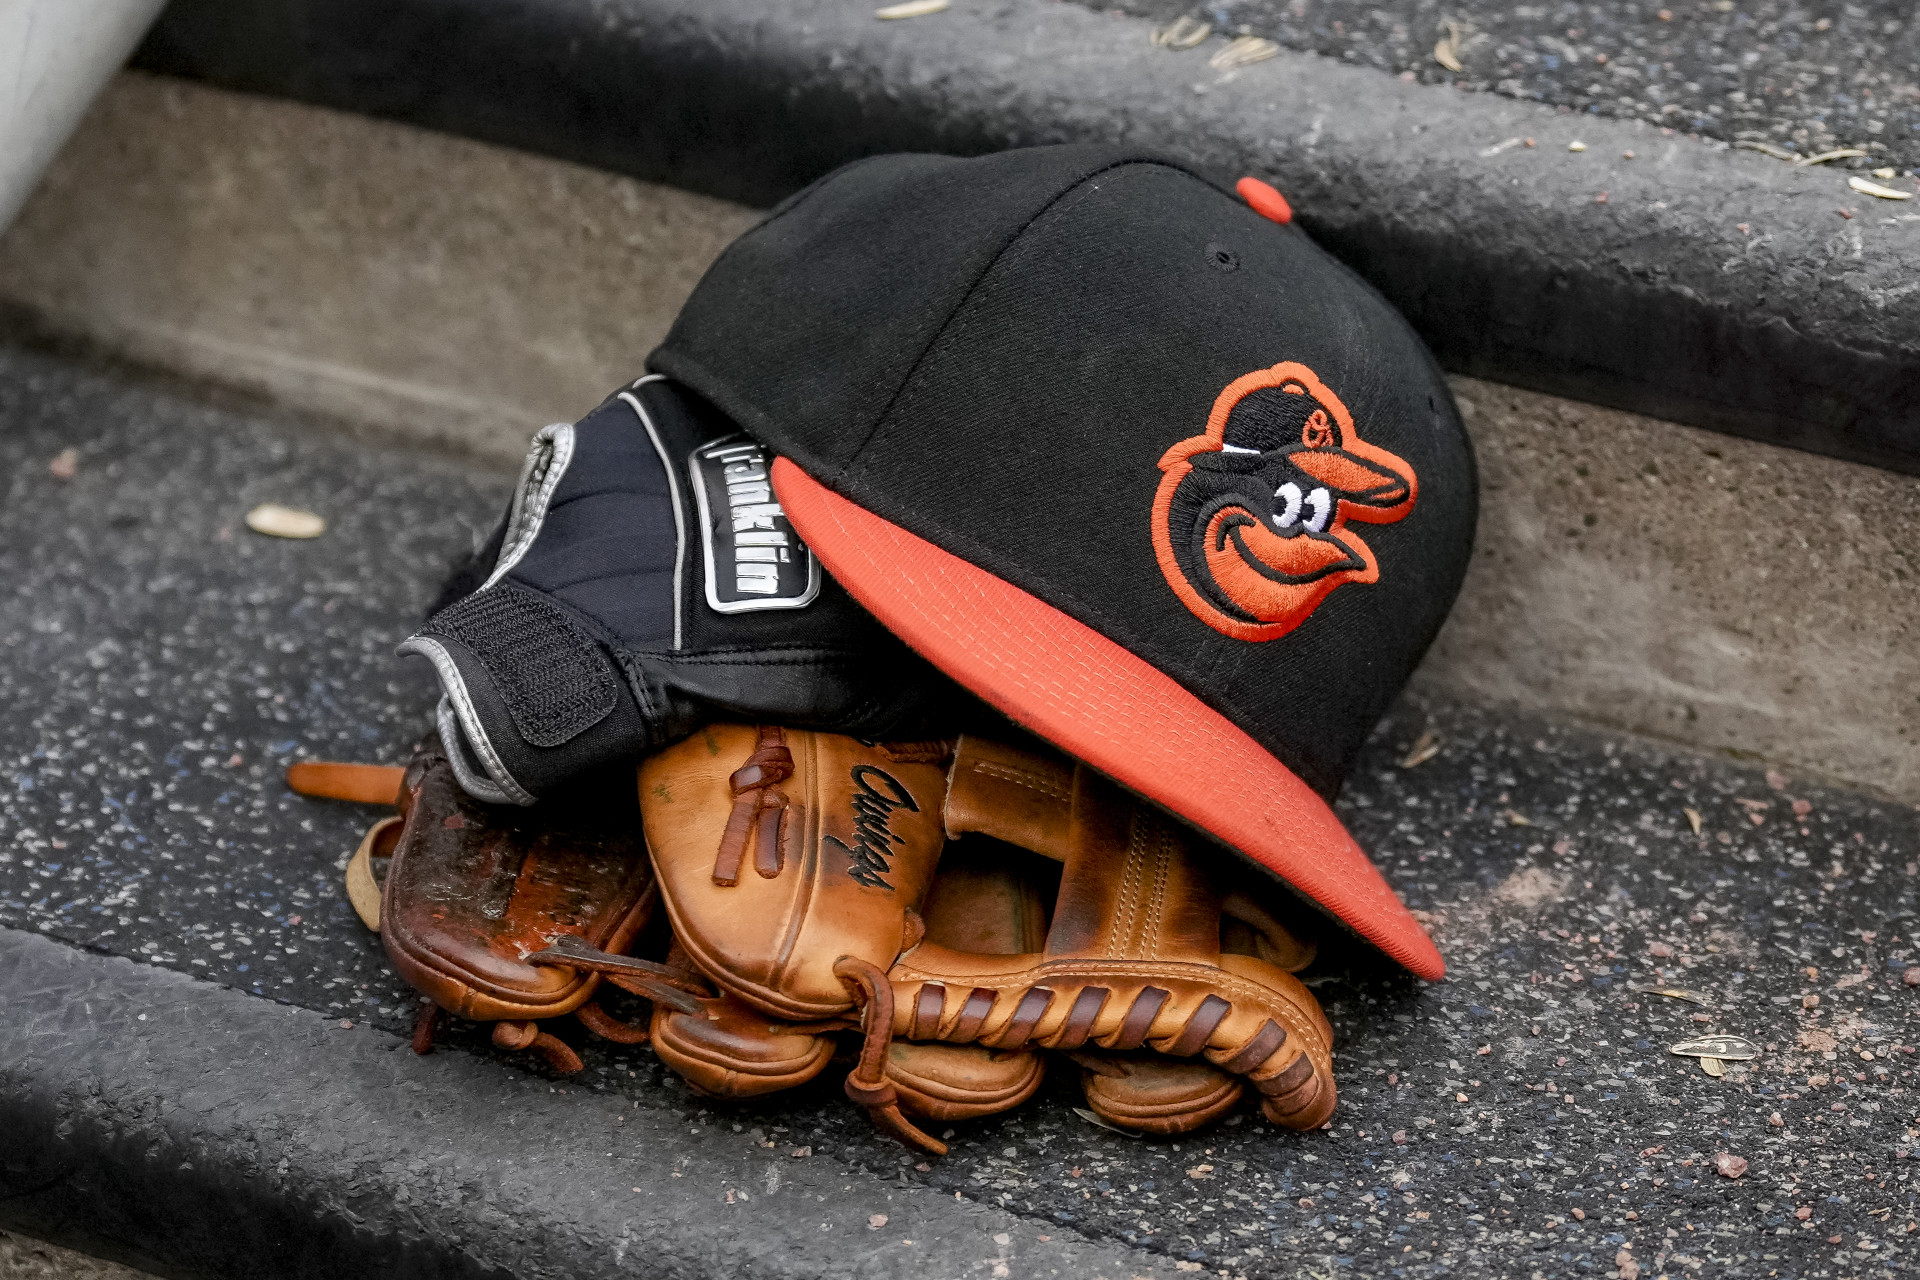 We Will Never Leave': Orioles To Stay In Baltimore, CEO Says